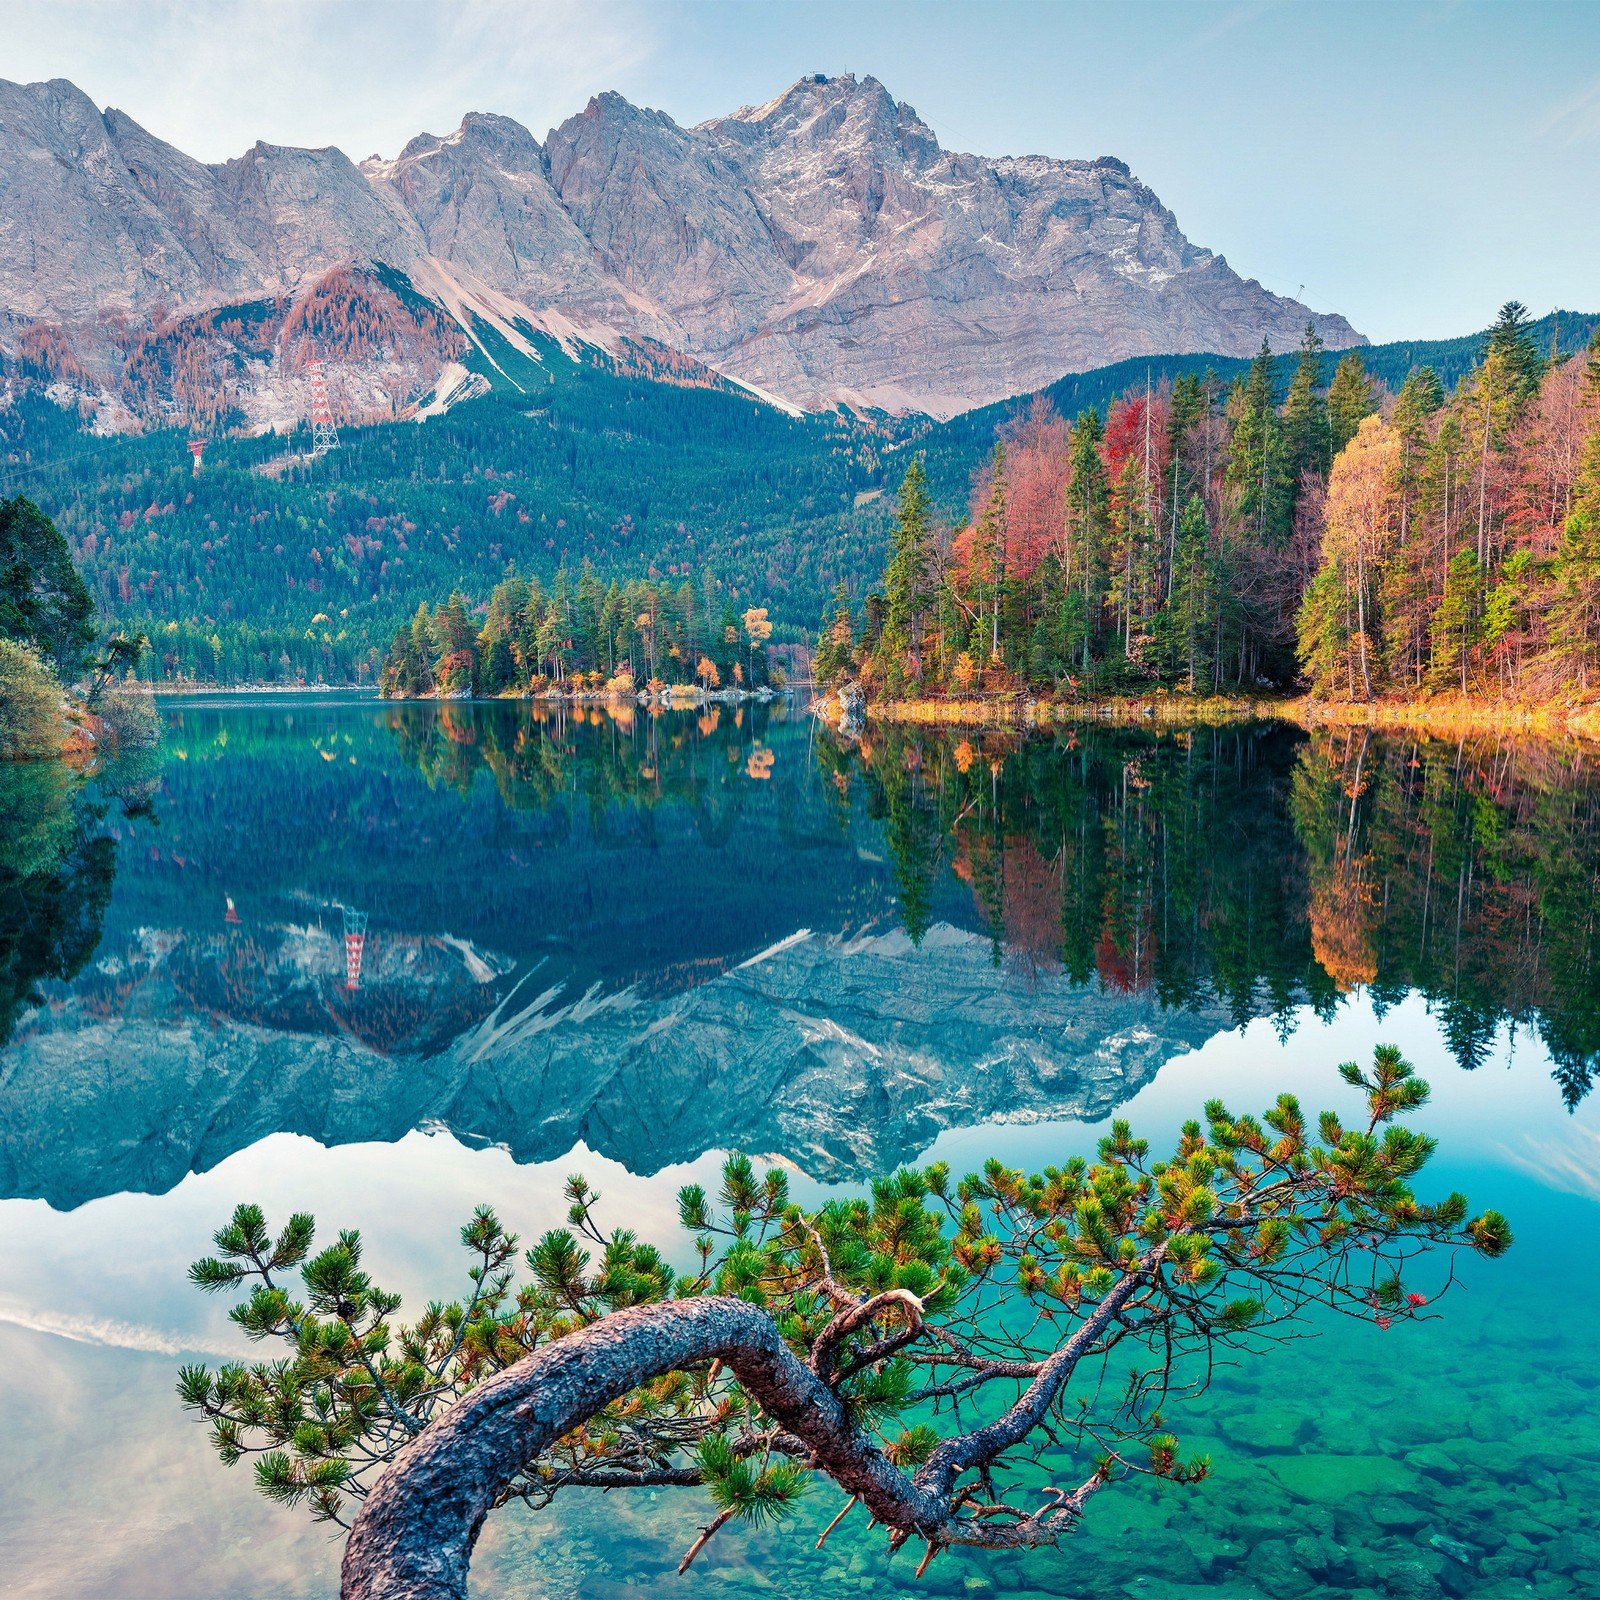 Fotomurale in TNT: Autunno a Eibsee - 254x184 cm